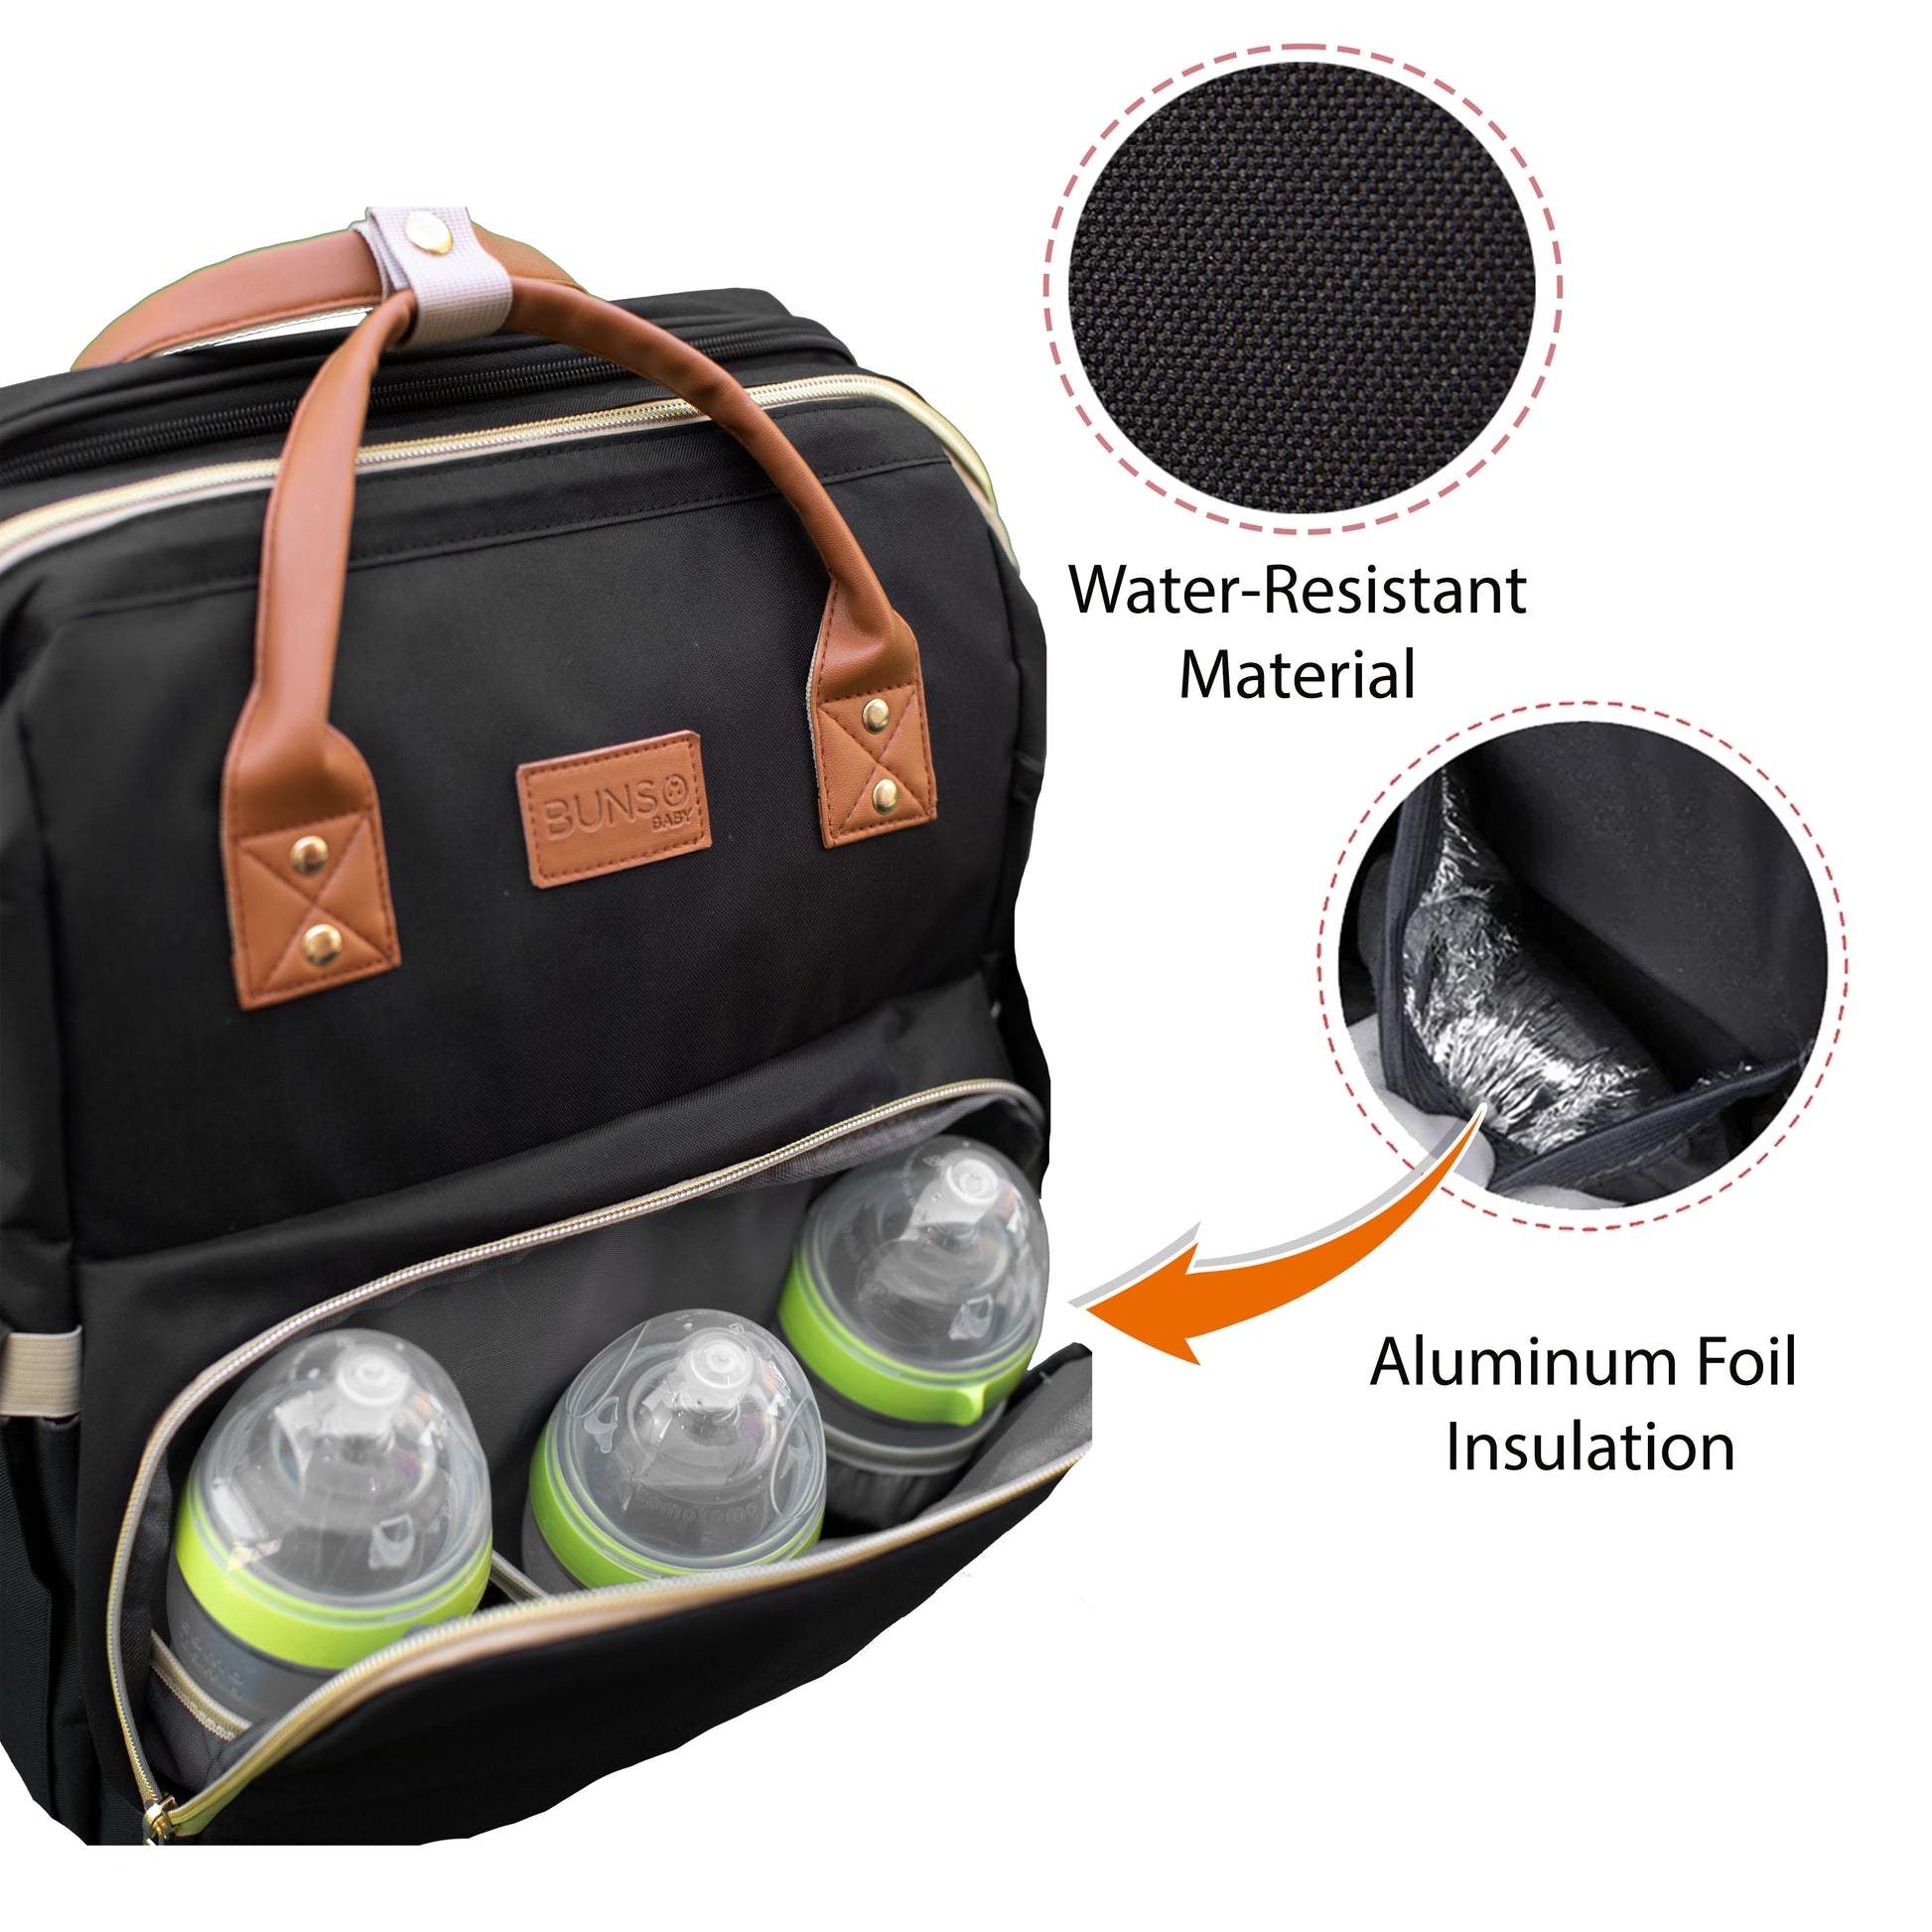 diaper bag backpack, bamomby multi-function waterproof travel backpack  nappy bags for mom,dad with insulated pockets, changing pad, newborn diapers  registry baby shower gifts for boys,girls-black 